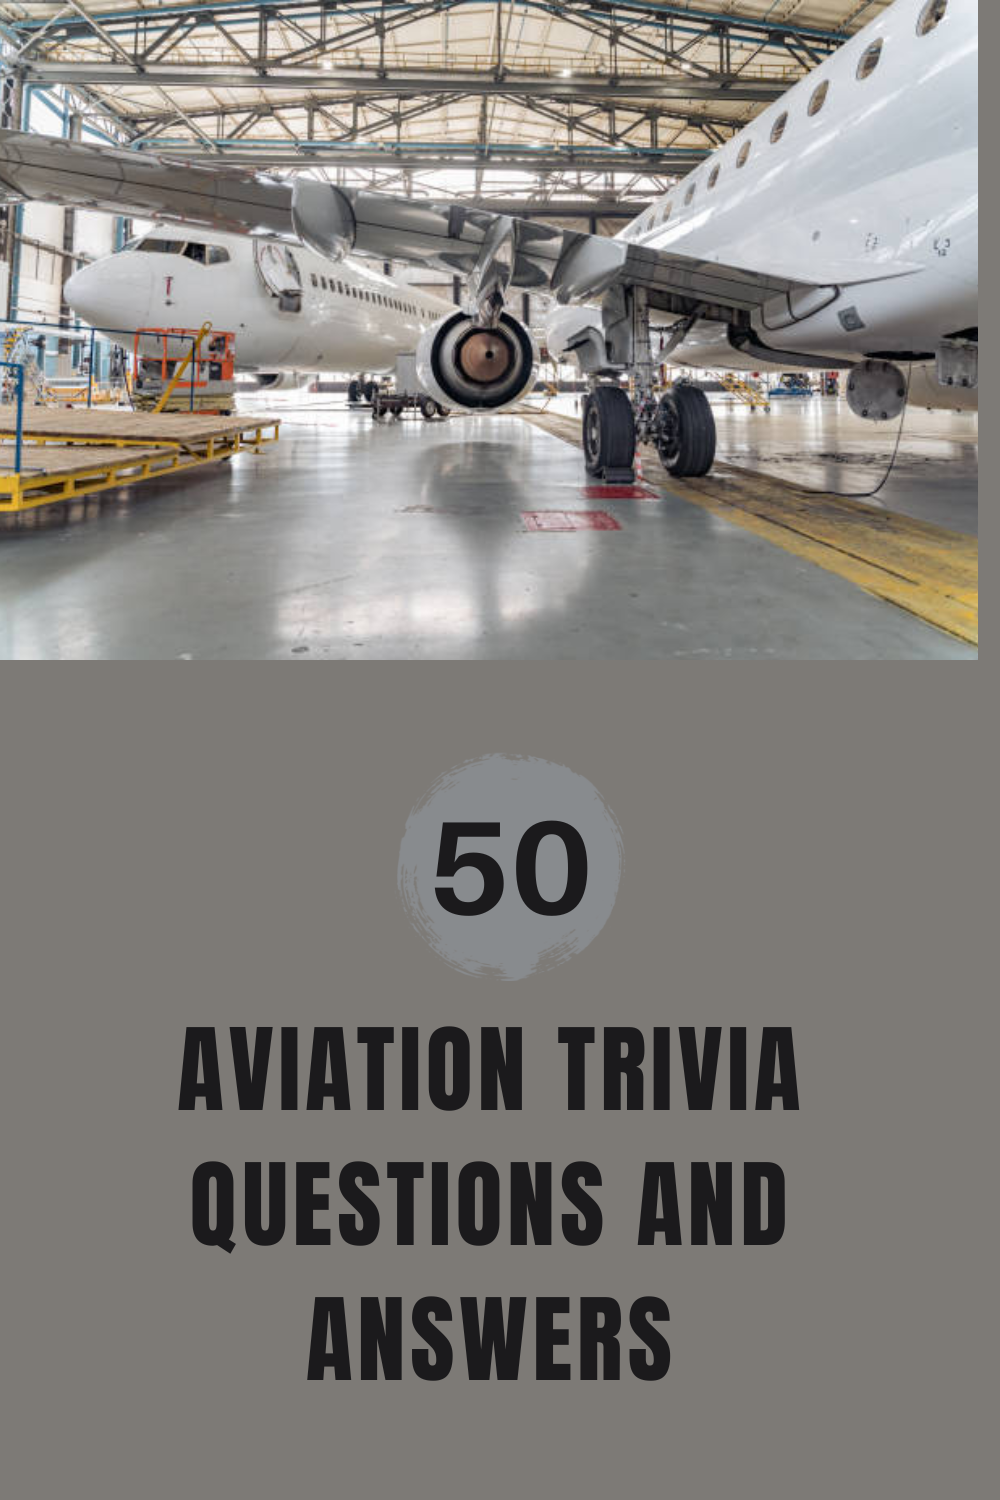 50 Aviation Trivia Questions and Answers